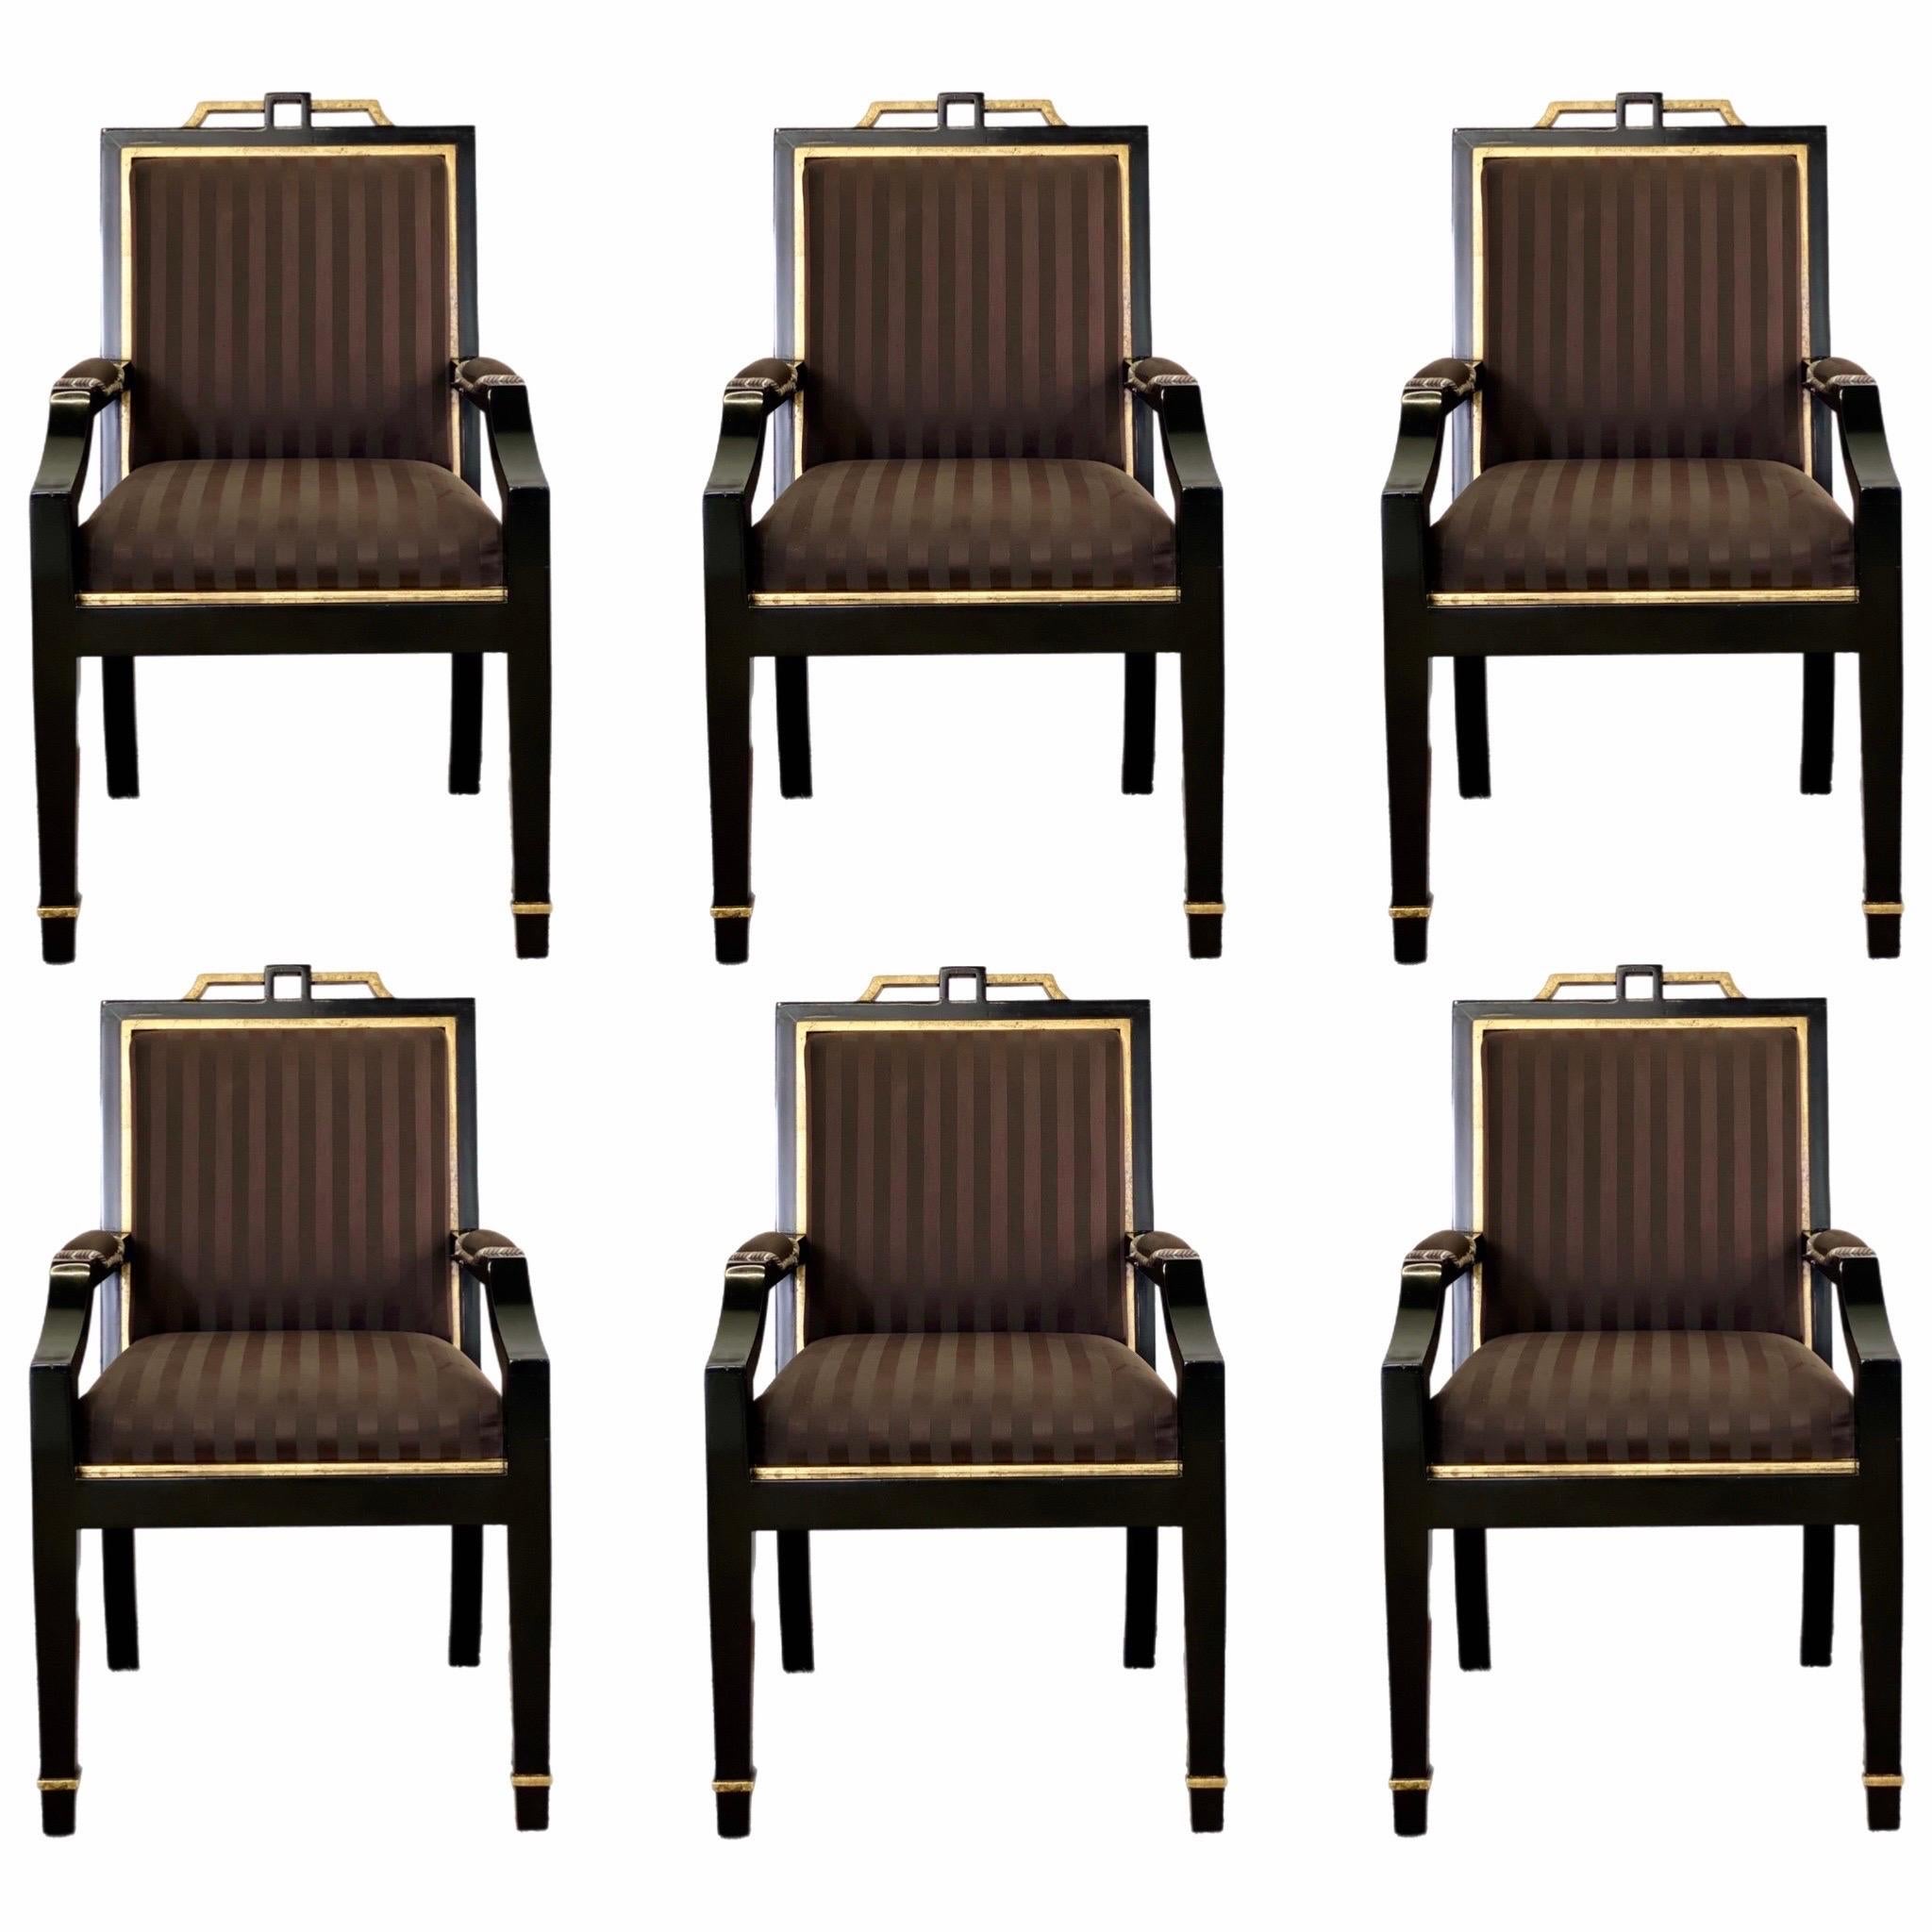 1980s Hollywood Regency Black Lacquer and Satin Dining Armchairs – Set of 6 For Sale